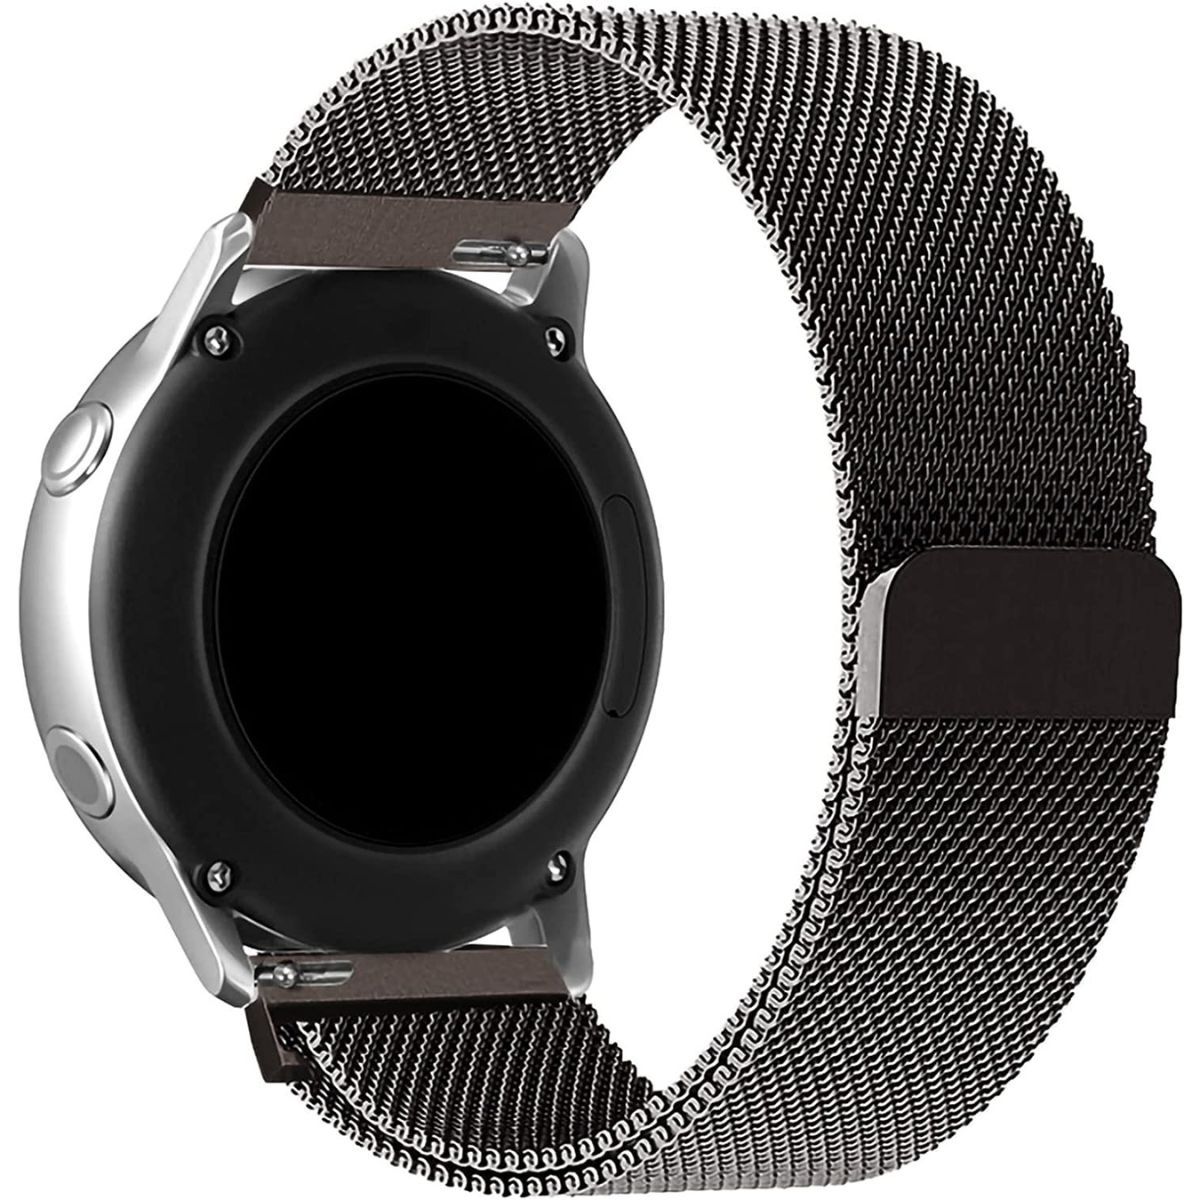 LOK Grade stainless steel band for Samsung Gear S3